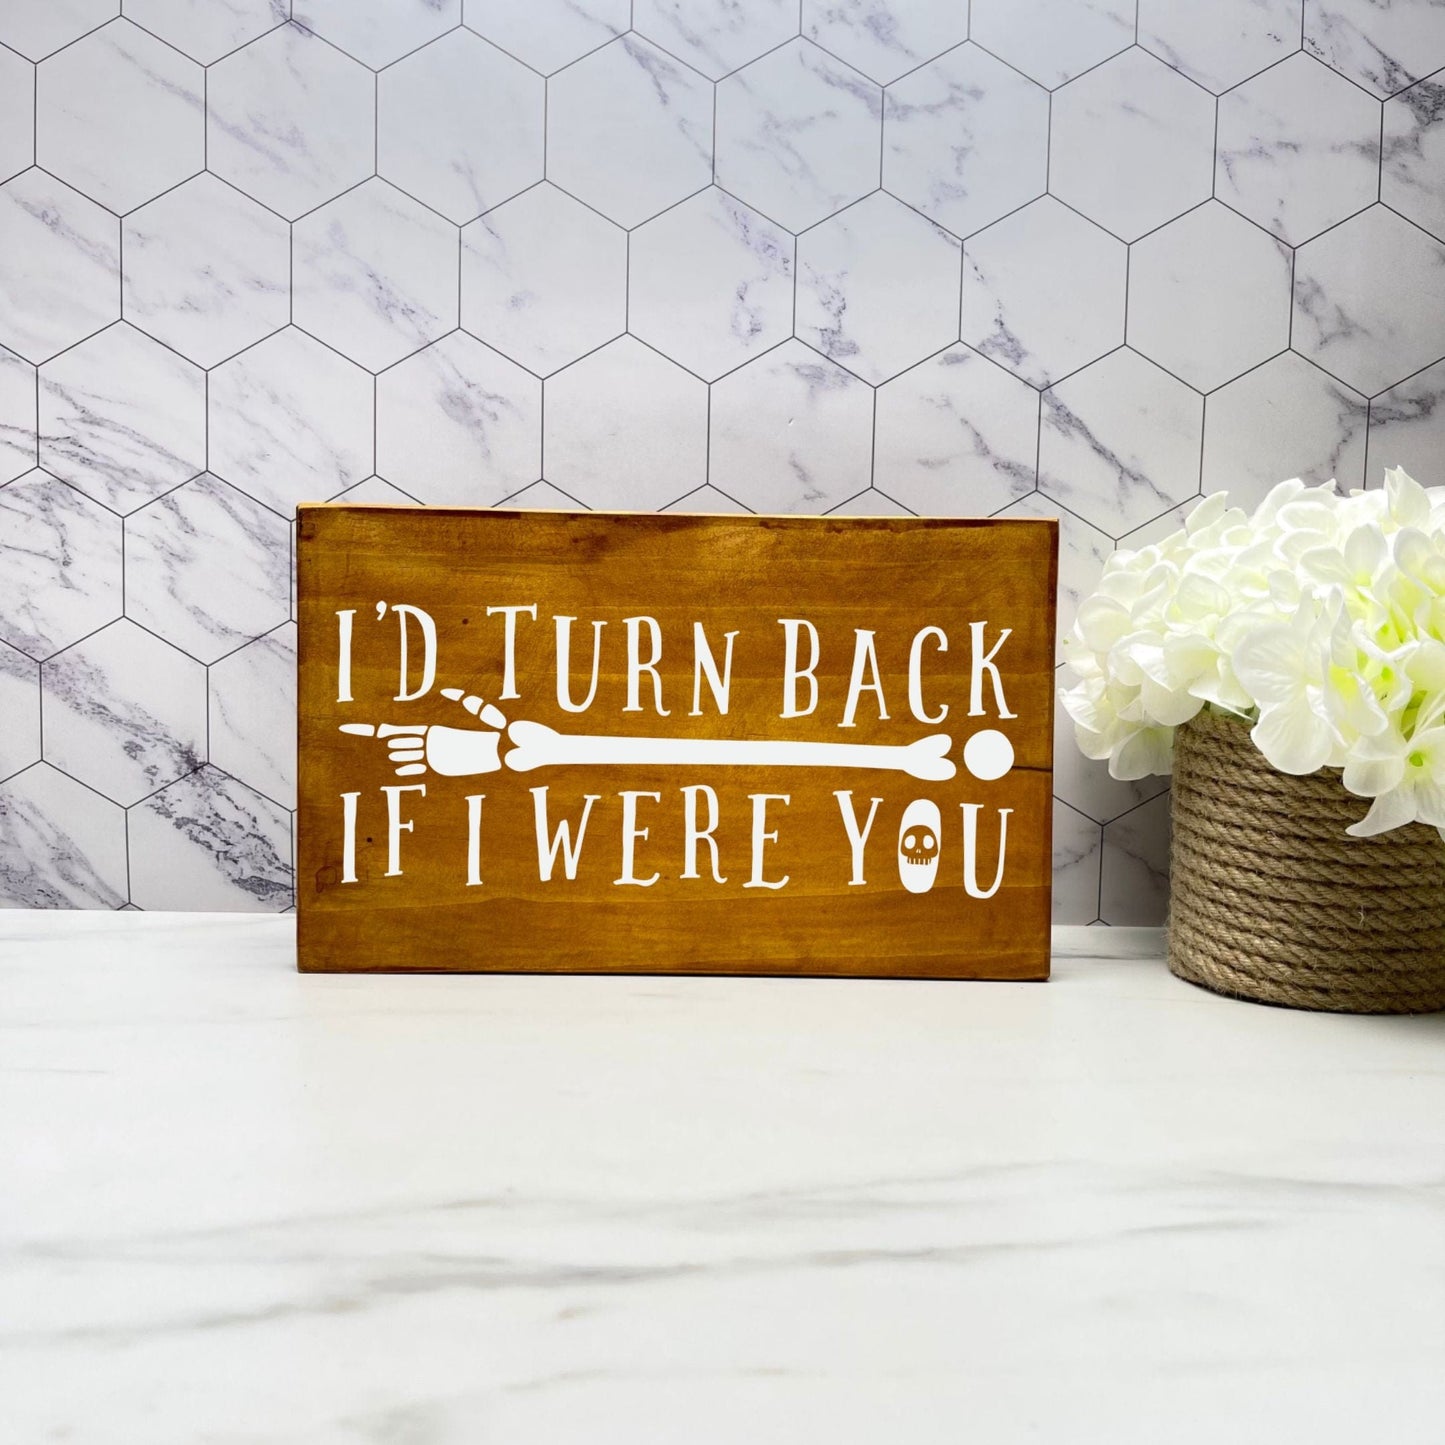 I'd turn back if I was you Sign, Halloween Wood Sign, Halloween Home Decor, Spooky Decor